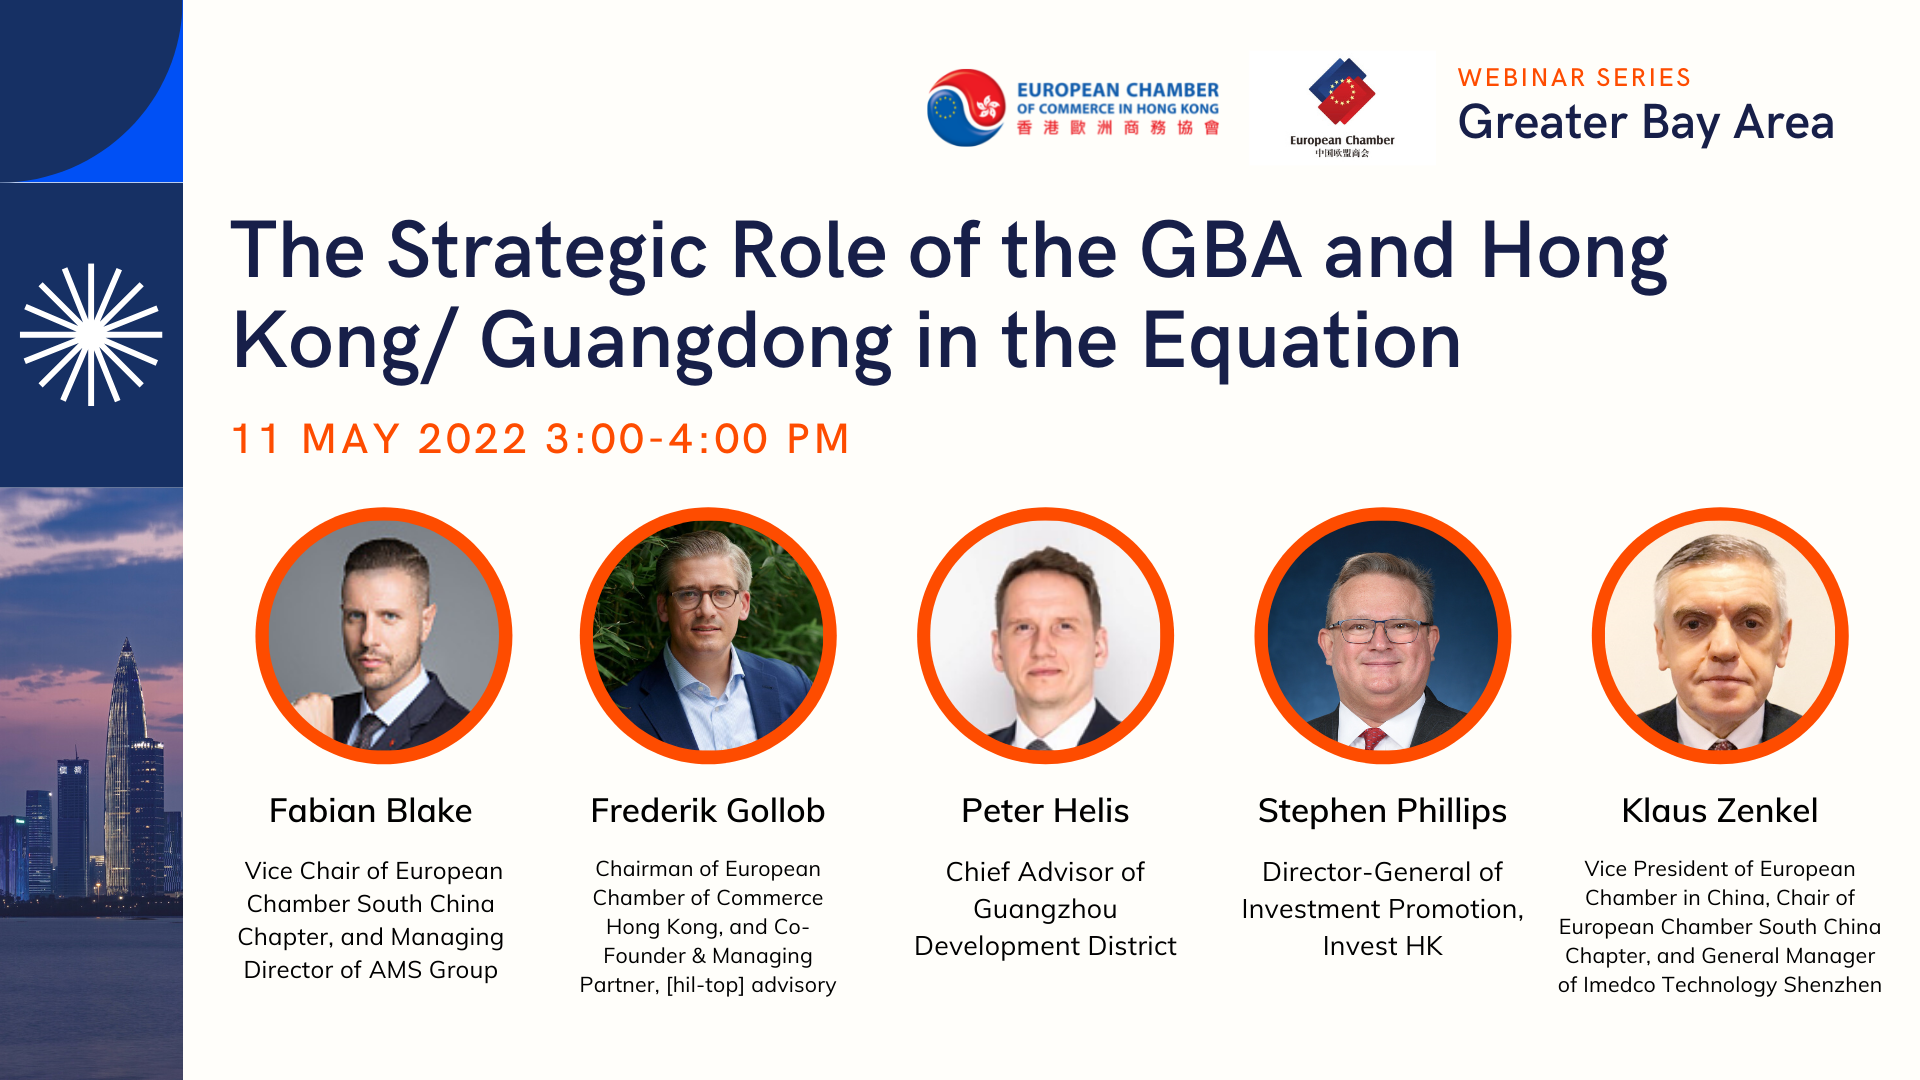 thumbnails The Strategic Role of the GBA and Hong Kong/Guangdong in the Equation